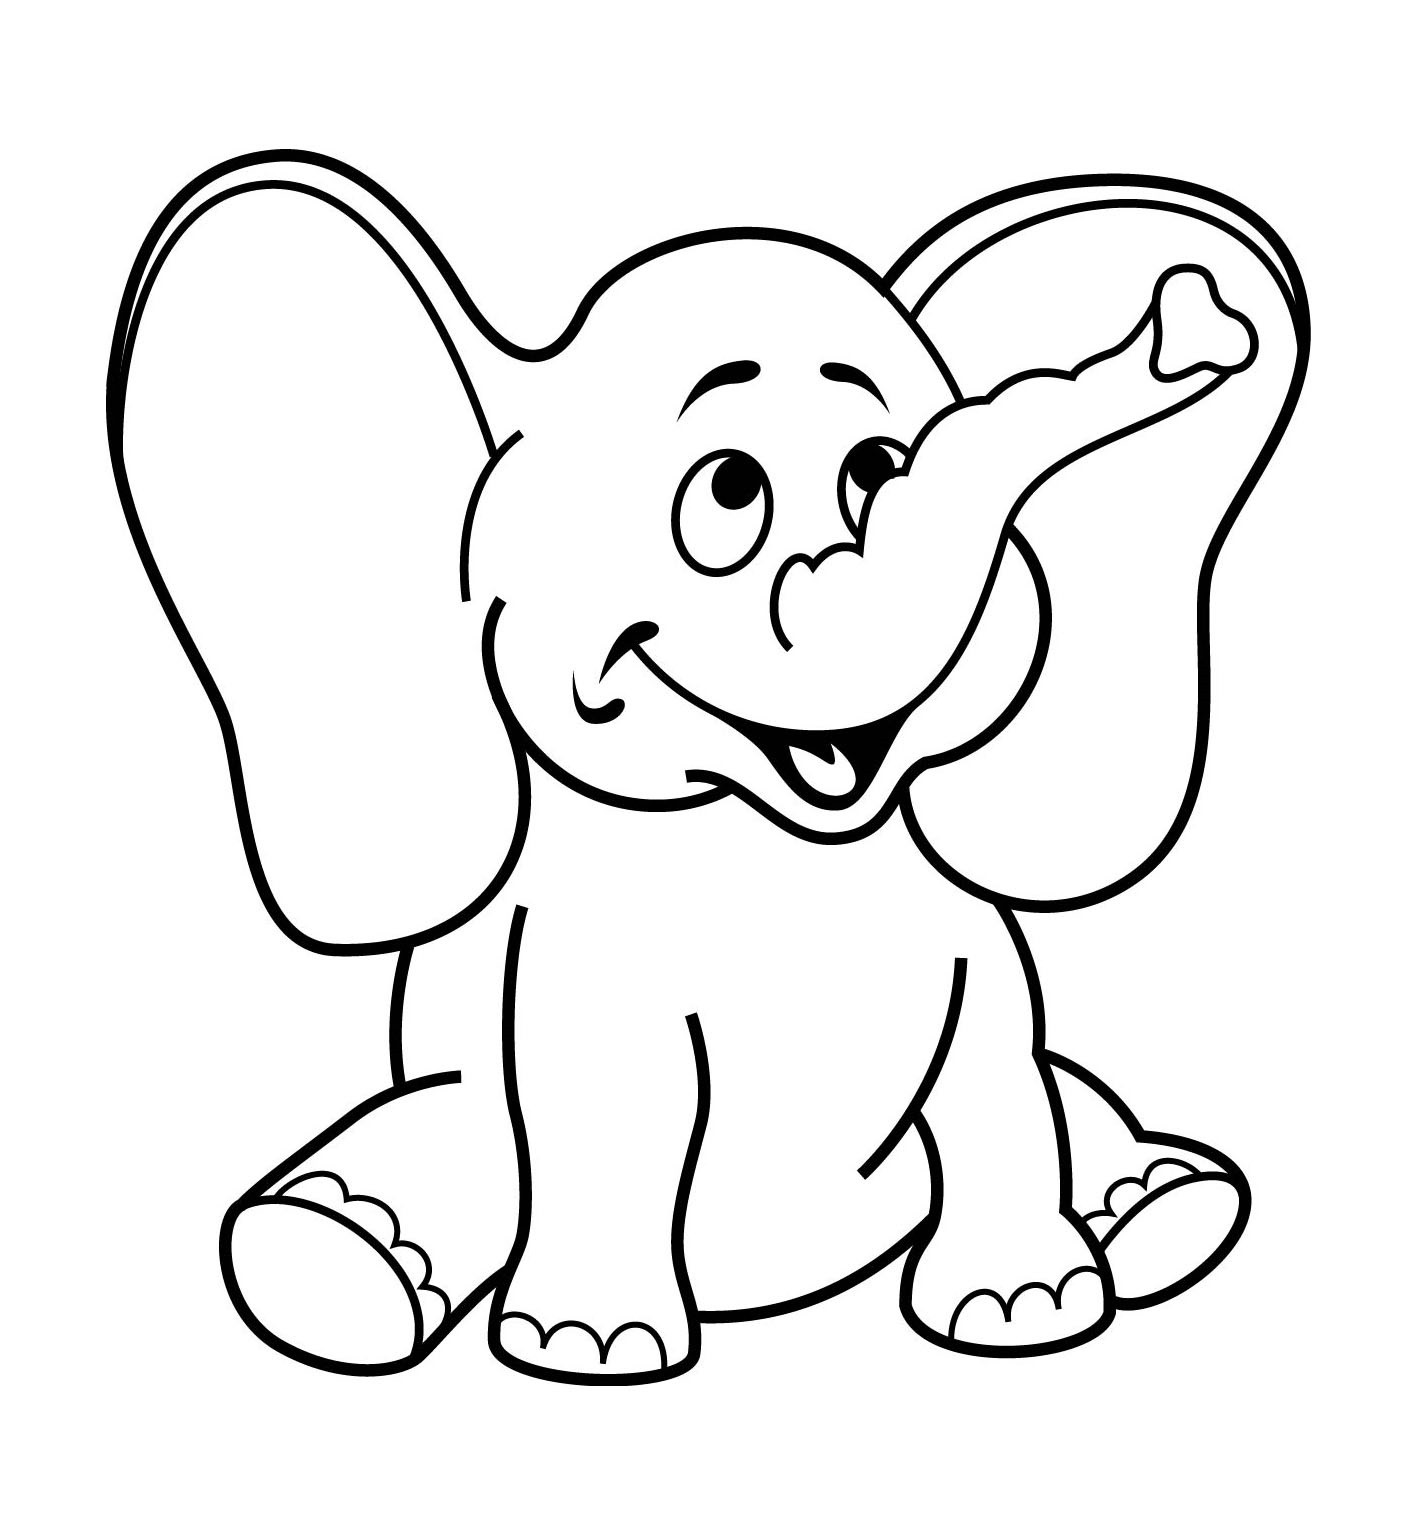 Coloring Pages For 10 Year Olds Printable at GetColorings.com | Free